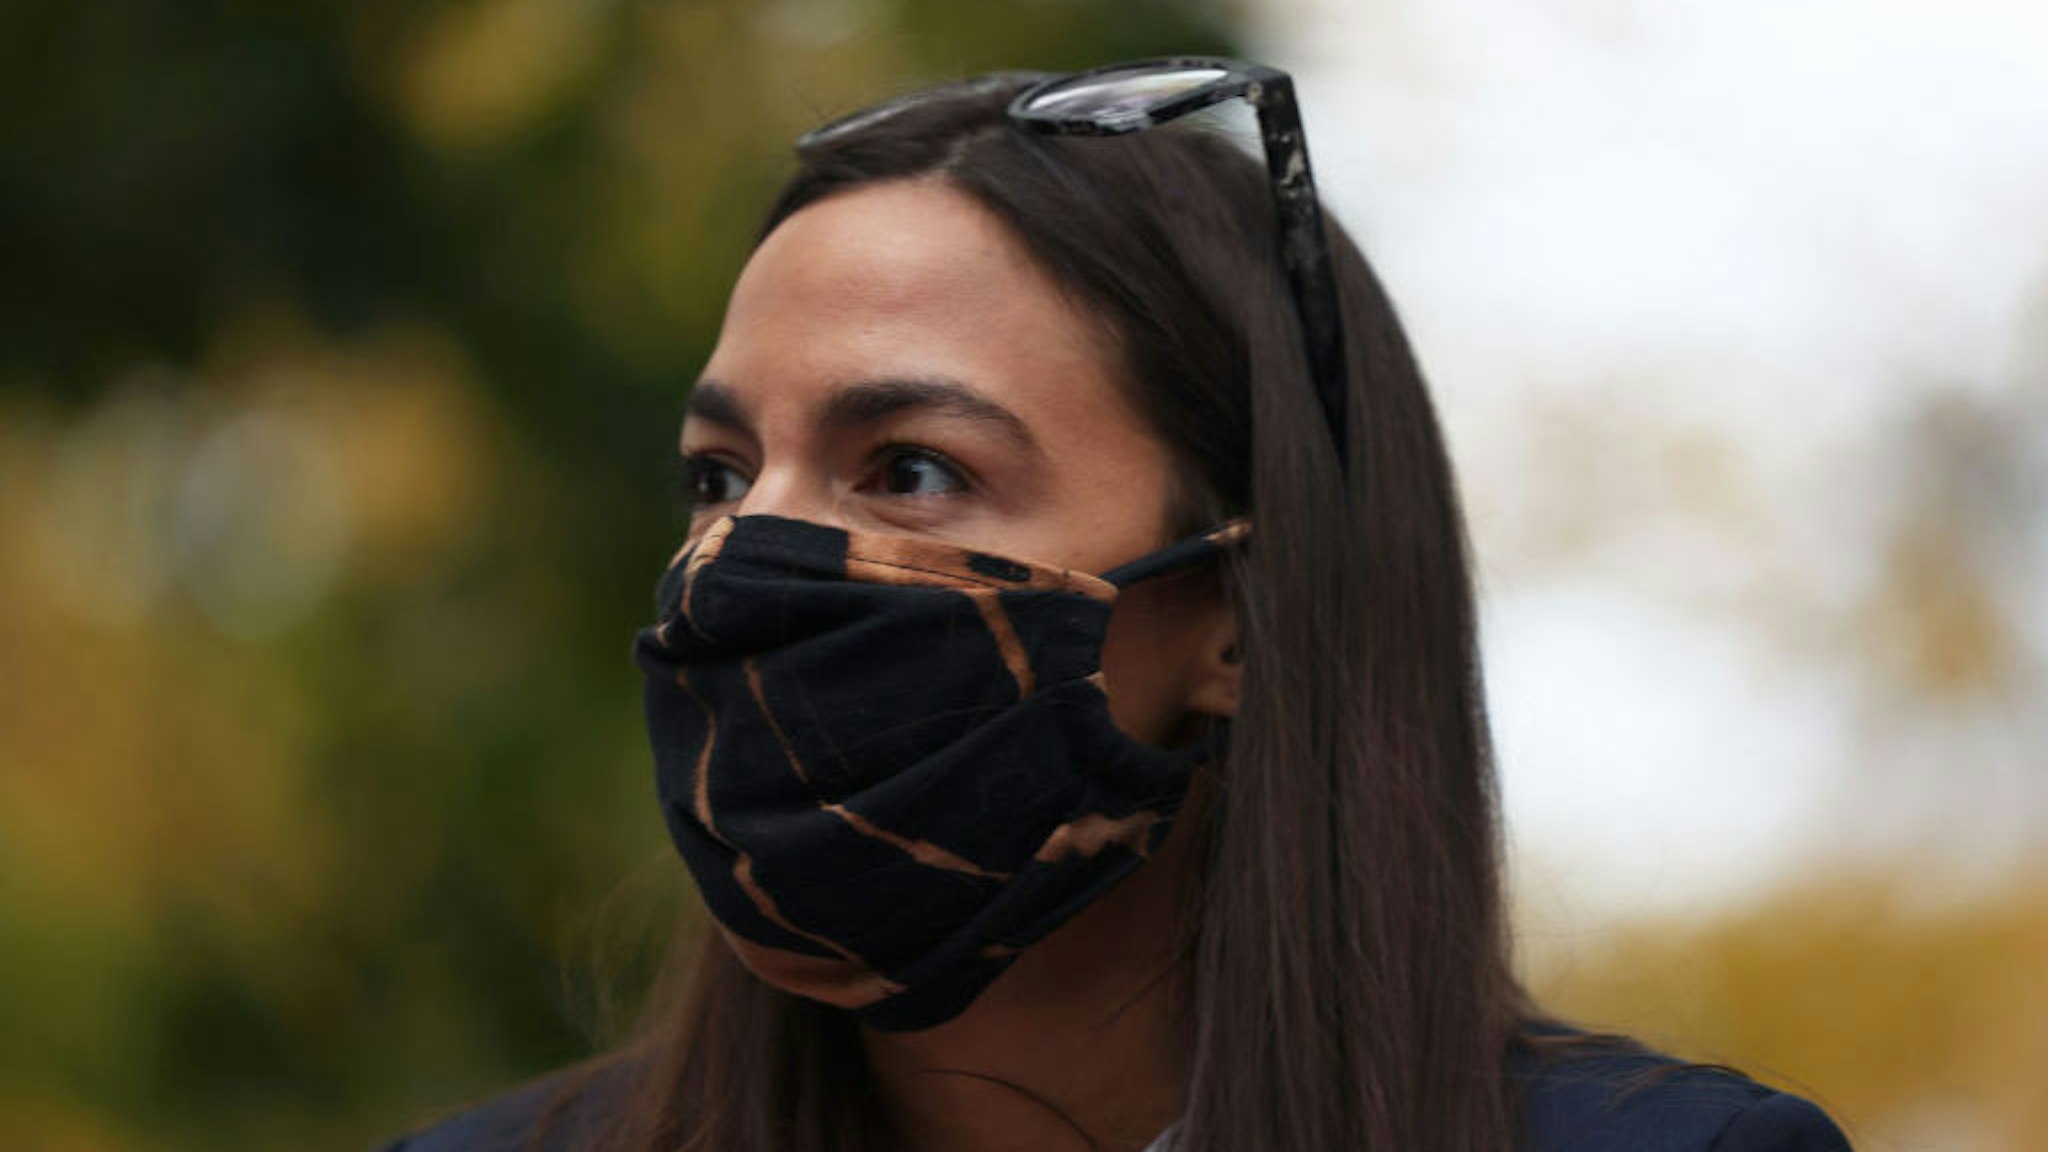 NEW YORK, NEW YORK - OCTOBER 27: Rep. Alexandria Ocasio-Cortez (D-NY) looks out towards a crowd during a food distribution event on October 27, 2020 in New York City. Rep. Alexandria Ocasio-Cortez (D-NY), New York state Assemblywoman Catalina Cruz, State Sen. Jessica Ramos, and Assembly District 34 candidate Jessica Gonzalez-Rojas, along with representatives from Make the Road NY helped to distribute food to families in Queens affected by economic distress due to the coronavirus (COVID-19) pandemic. (Photo by Michael M. Santiago/Getty Images)